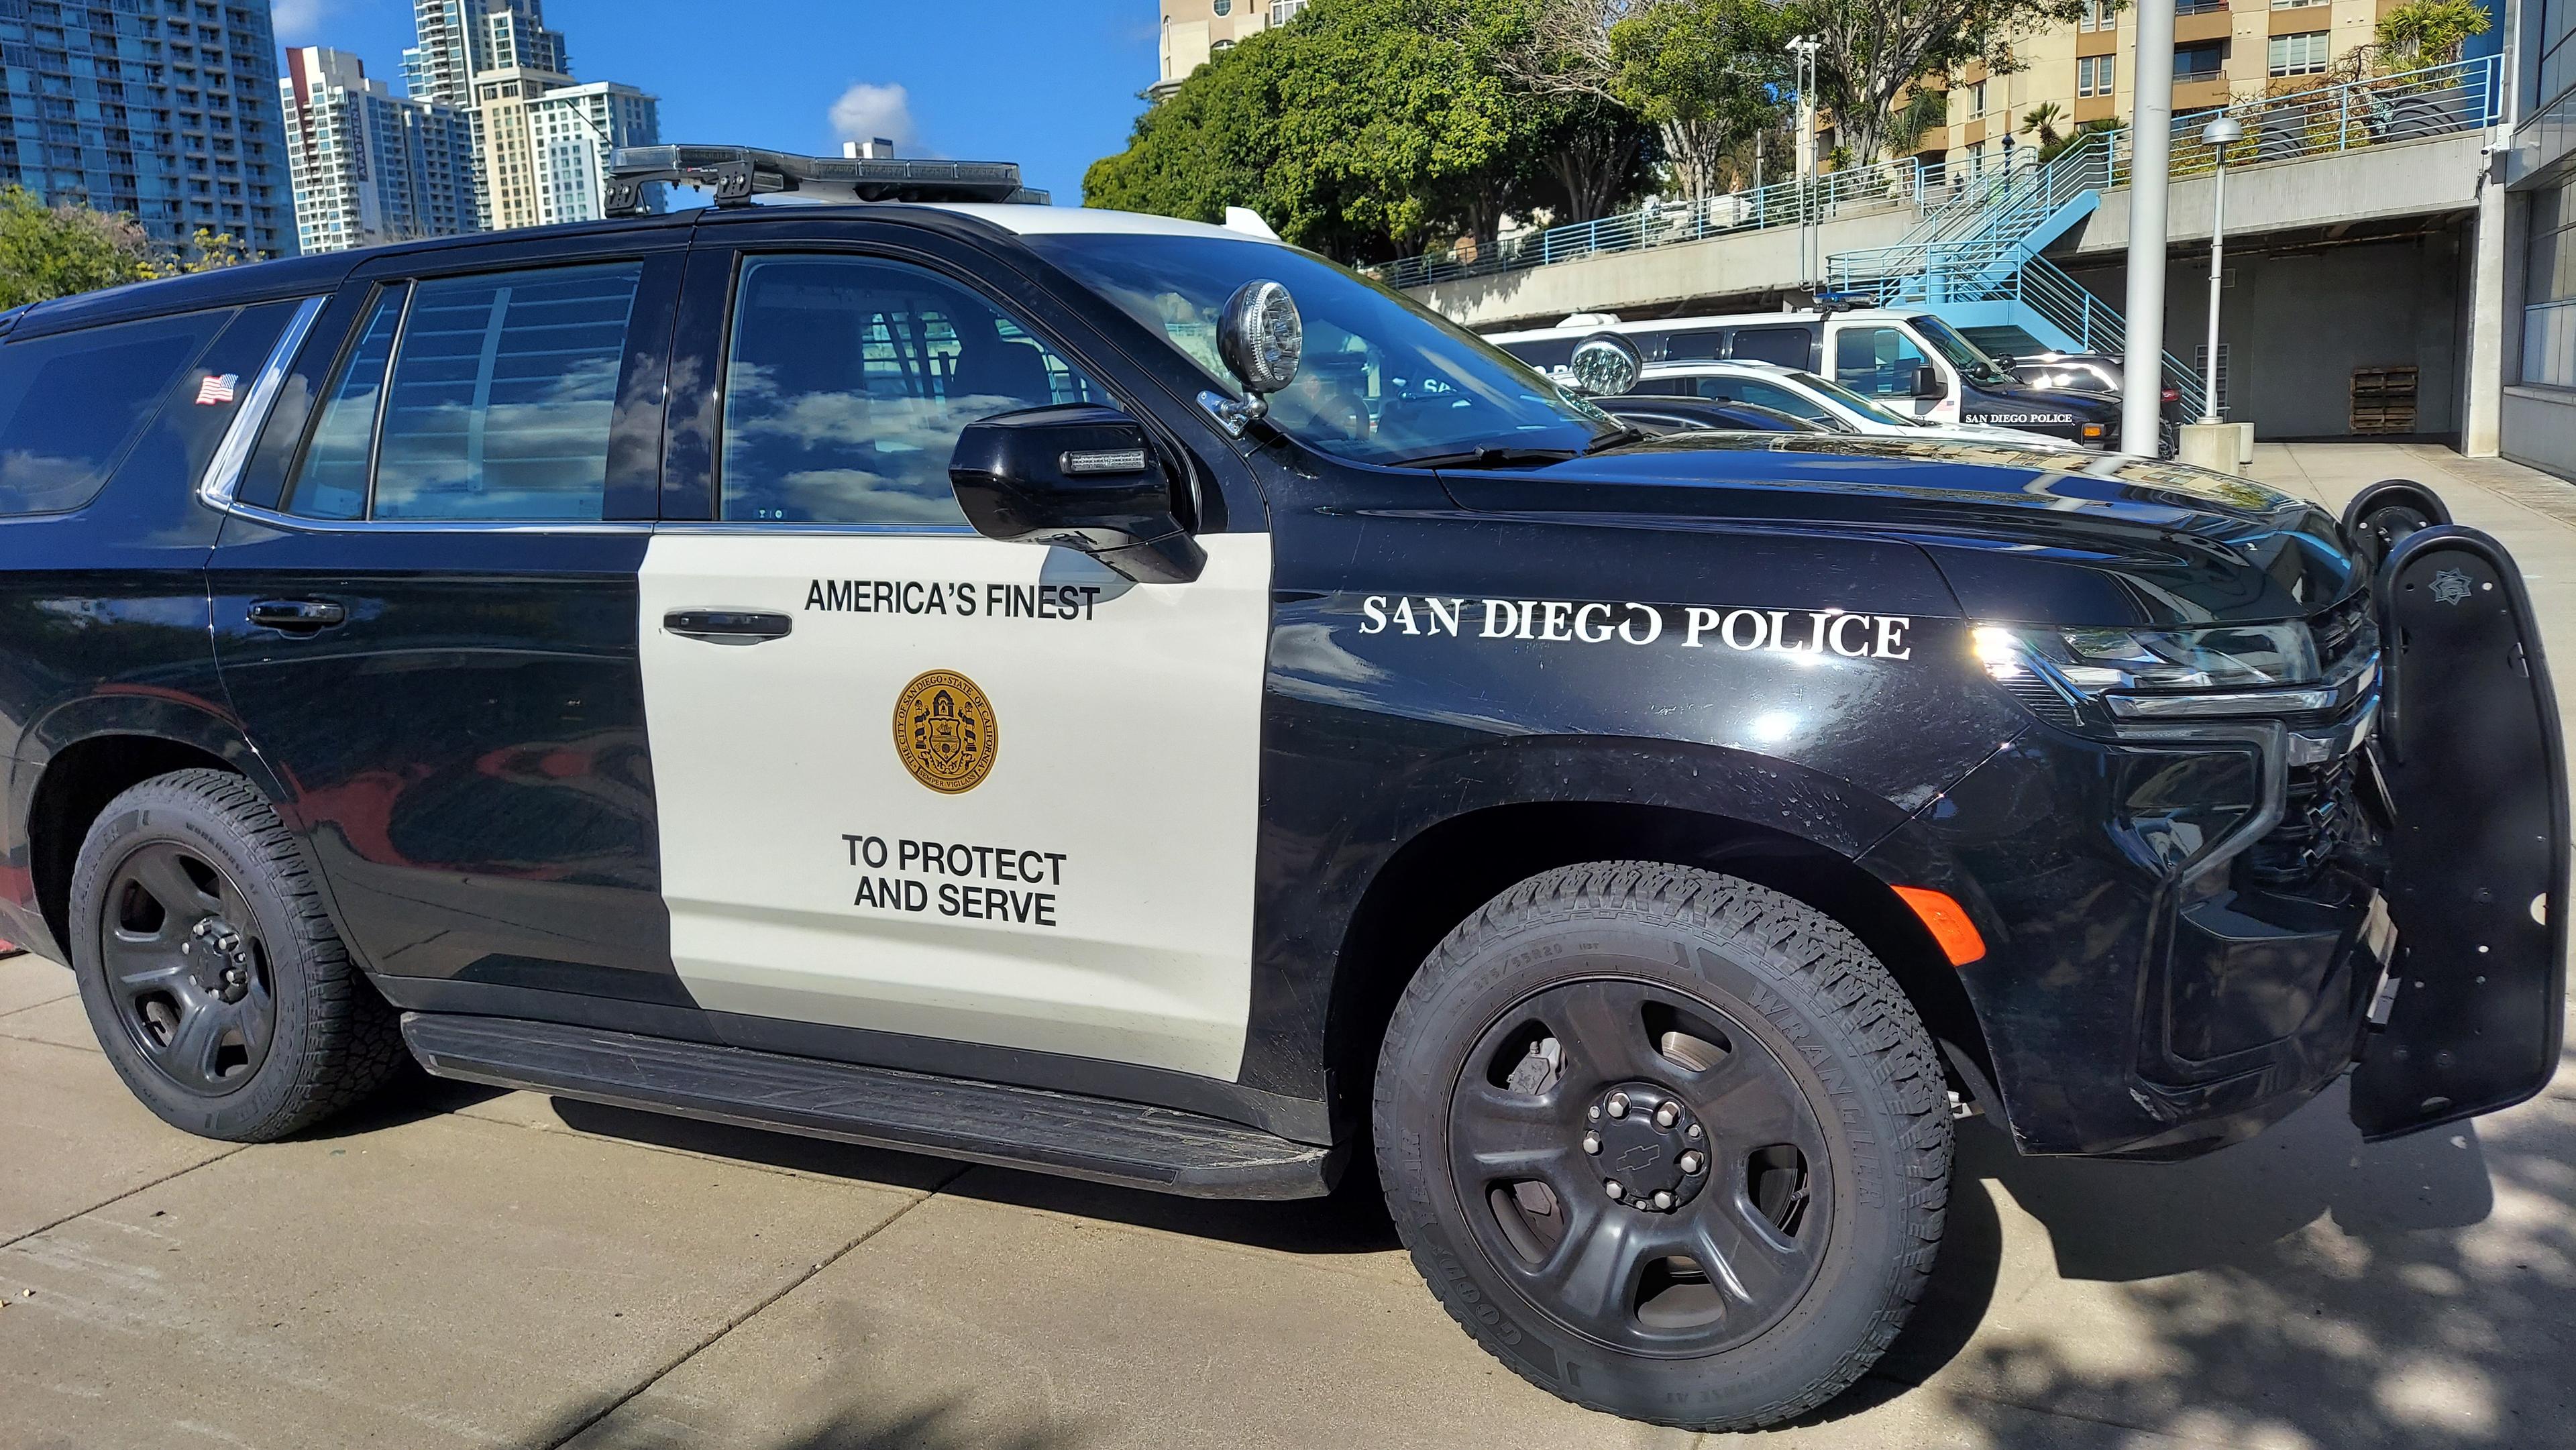 Man Shot on Motorcycle in San Diego; Suspect at Large